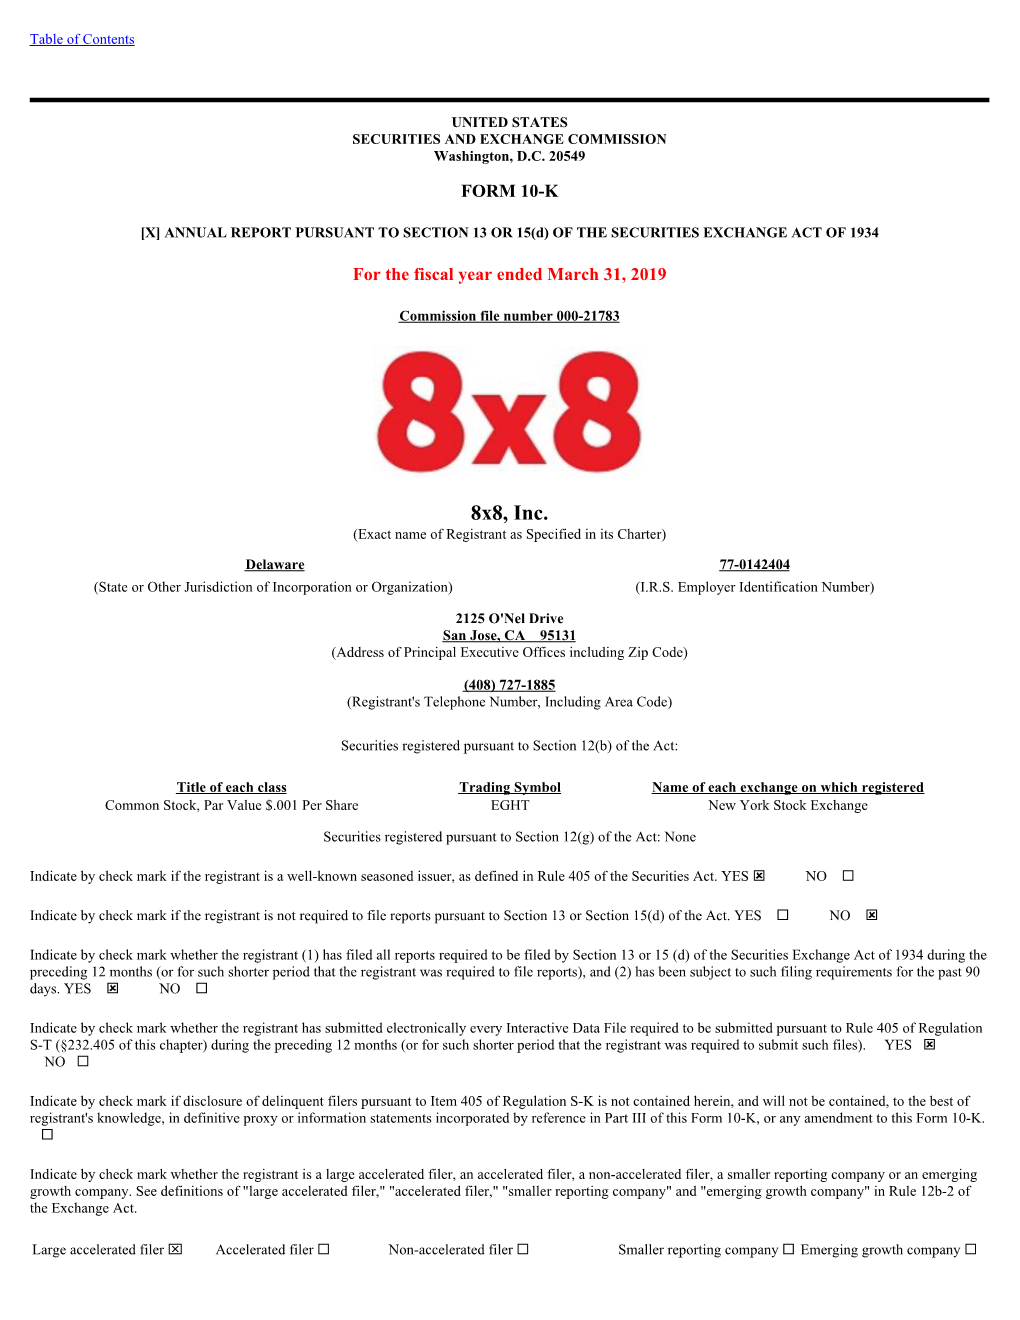 8X8, Inc. (Exact Name of Registrant As Specified in Its Charter)